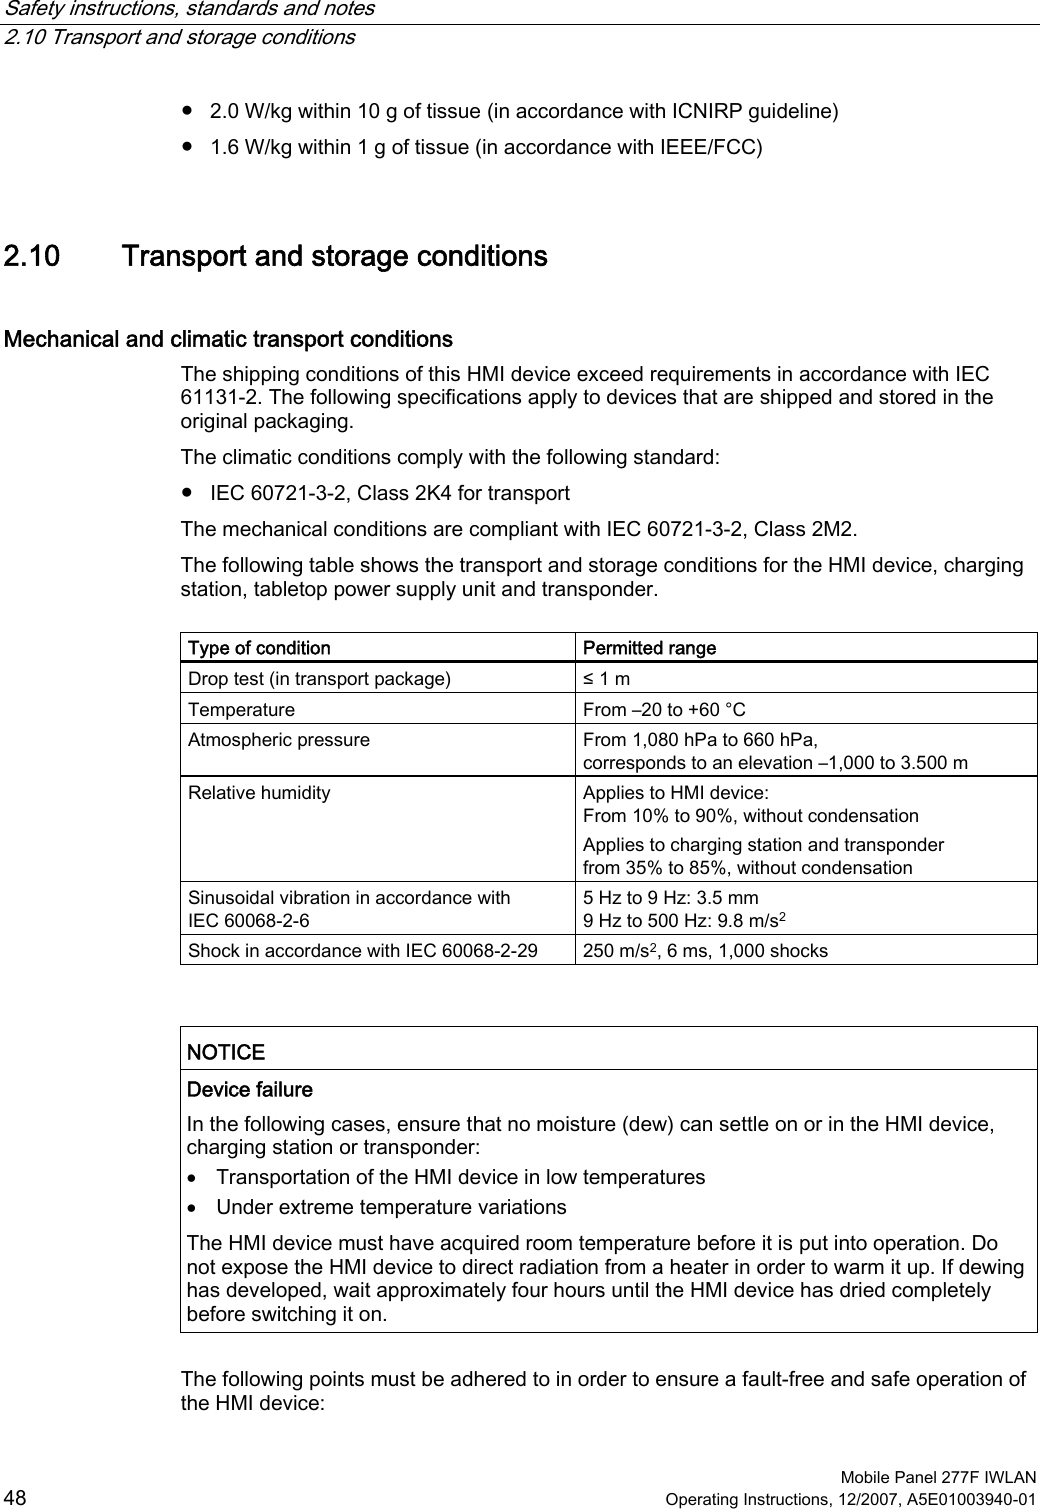 Safety instructions, standards and notes   2.10 Transport and storage conditions  Mobile Panel 277F IWLAN 48 Operating Instructions, 12/2007, A5E01003940-01 ●  2.0 W/kg within 10 g of tissue (in accordance with ICNIRP guideline) ●  1.6 W/kg within 1 g of tissue (in accordance with IEEE/FCC) 2.10 Transport and storage conditions Mechanical and climatic transport conditions The shipping conditions of this HMI device exceed requirements in accordance with IEC 61131-2. The following specifications apply to devices that are shipped and stored in the original packaging.  The climatic conditions comply with the following standard: ●  IEC 60721-3-2, Class 2K4 for transport The mechanical conditions are compliant with IEC 60721-3-2, Class 2M2. The following table shows the transport and storage conditions for the HMI device, charging station, tabletop power supply unit and transponder.   Type of condition  Permitted range Drop test (in transport package)  ≤ 1 m Temperature  From –20 to +60 °C Atmospheric pressure  From 1,080 hPa to 660 hPa, corresponds to an elevation –1,000 to 3.500 m Relative humidity  Applies to HMI device: From 10% to 90%, without condensation Applies to charging station and transponder from 35% to 85%, without condensation  Sinusoidal vibration in accordance with IEC 60068-2-6 5 Hz to 9 Hz: 3.5 mm 9 Hz to 500 Hz: 9.8 m/s2 Shock in accordance with IEC 60068-2-29  250 m/s2, 6 ms, 1,000 shocks   NOTICE  Device failure In the following cases, ensure that no moisture (dew) can settle on or in the HMI device, charging station or transponder:  • Transportation of the HMI device in low temperatures • Under extreme temperature variations The HMI device must have acquired room temperature before it is put into operation. Do not expose the HMI device to direct radiation from a heater in order to warm it up. If dewing has developed, wait approximately four hours until the HMI device has dried completely before switching it on.   The following points must be adhered to in order to ensure a fault-free and safe operation of the HMI device: 